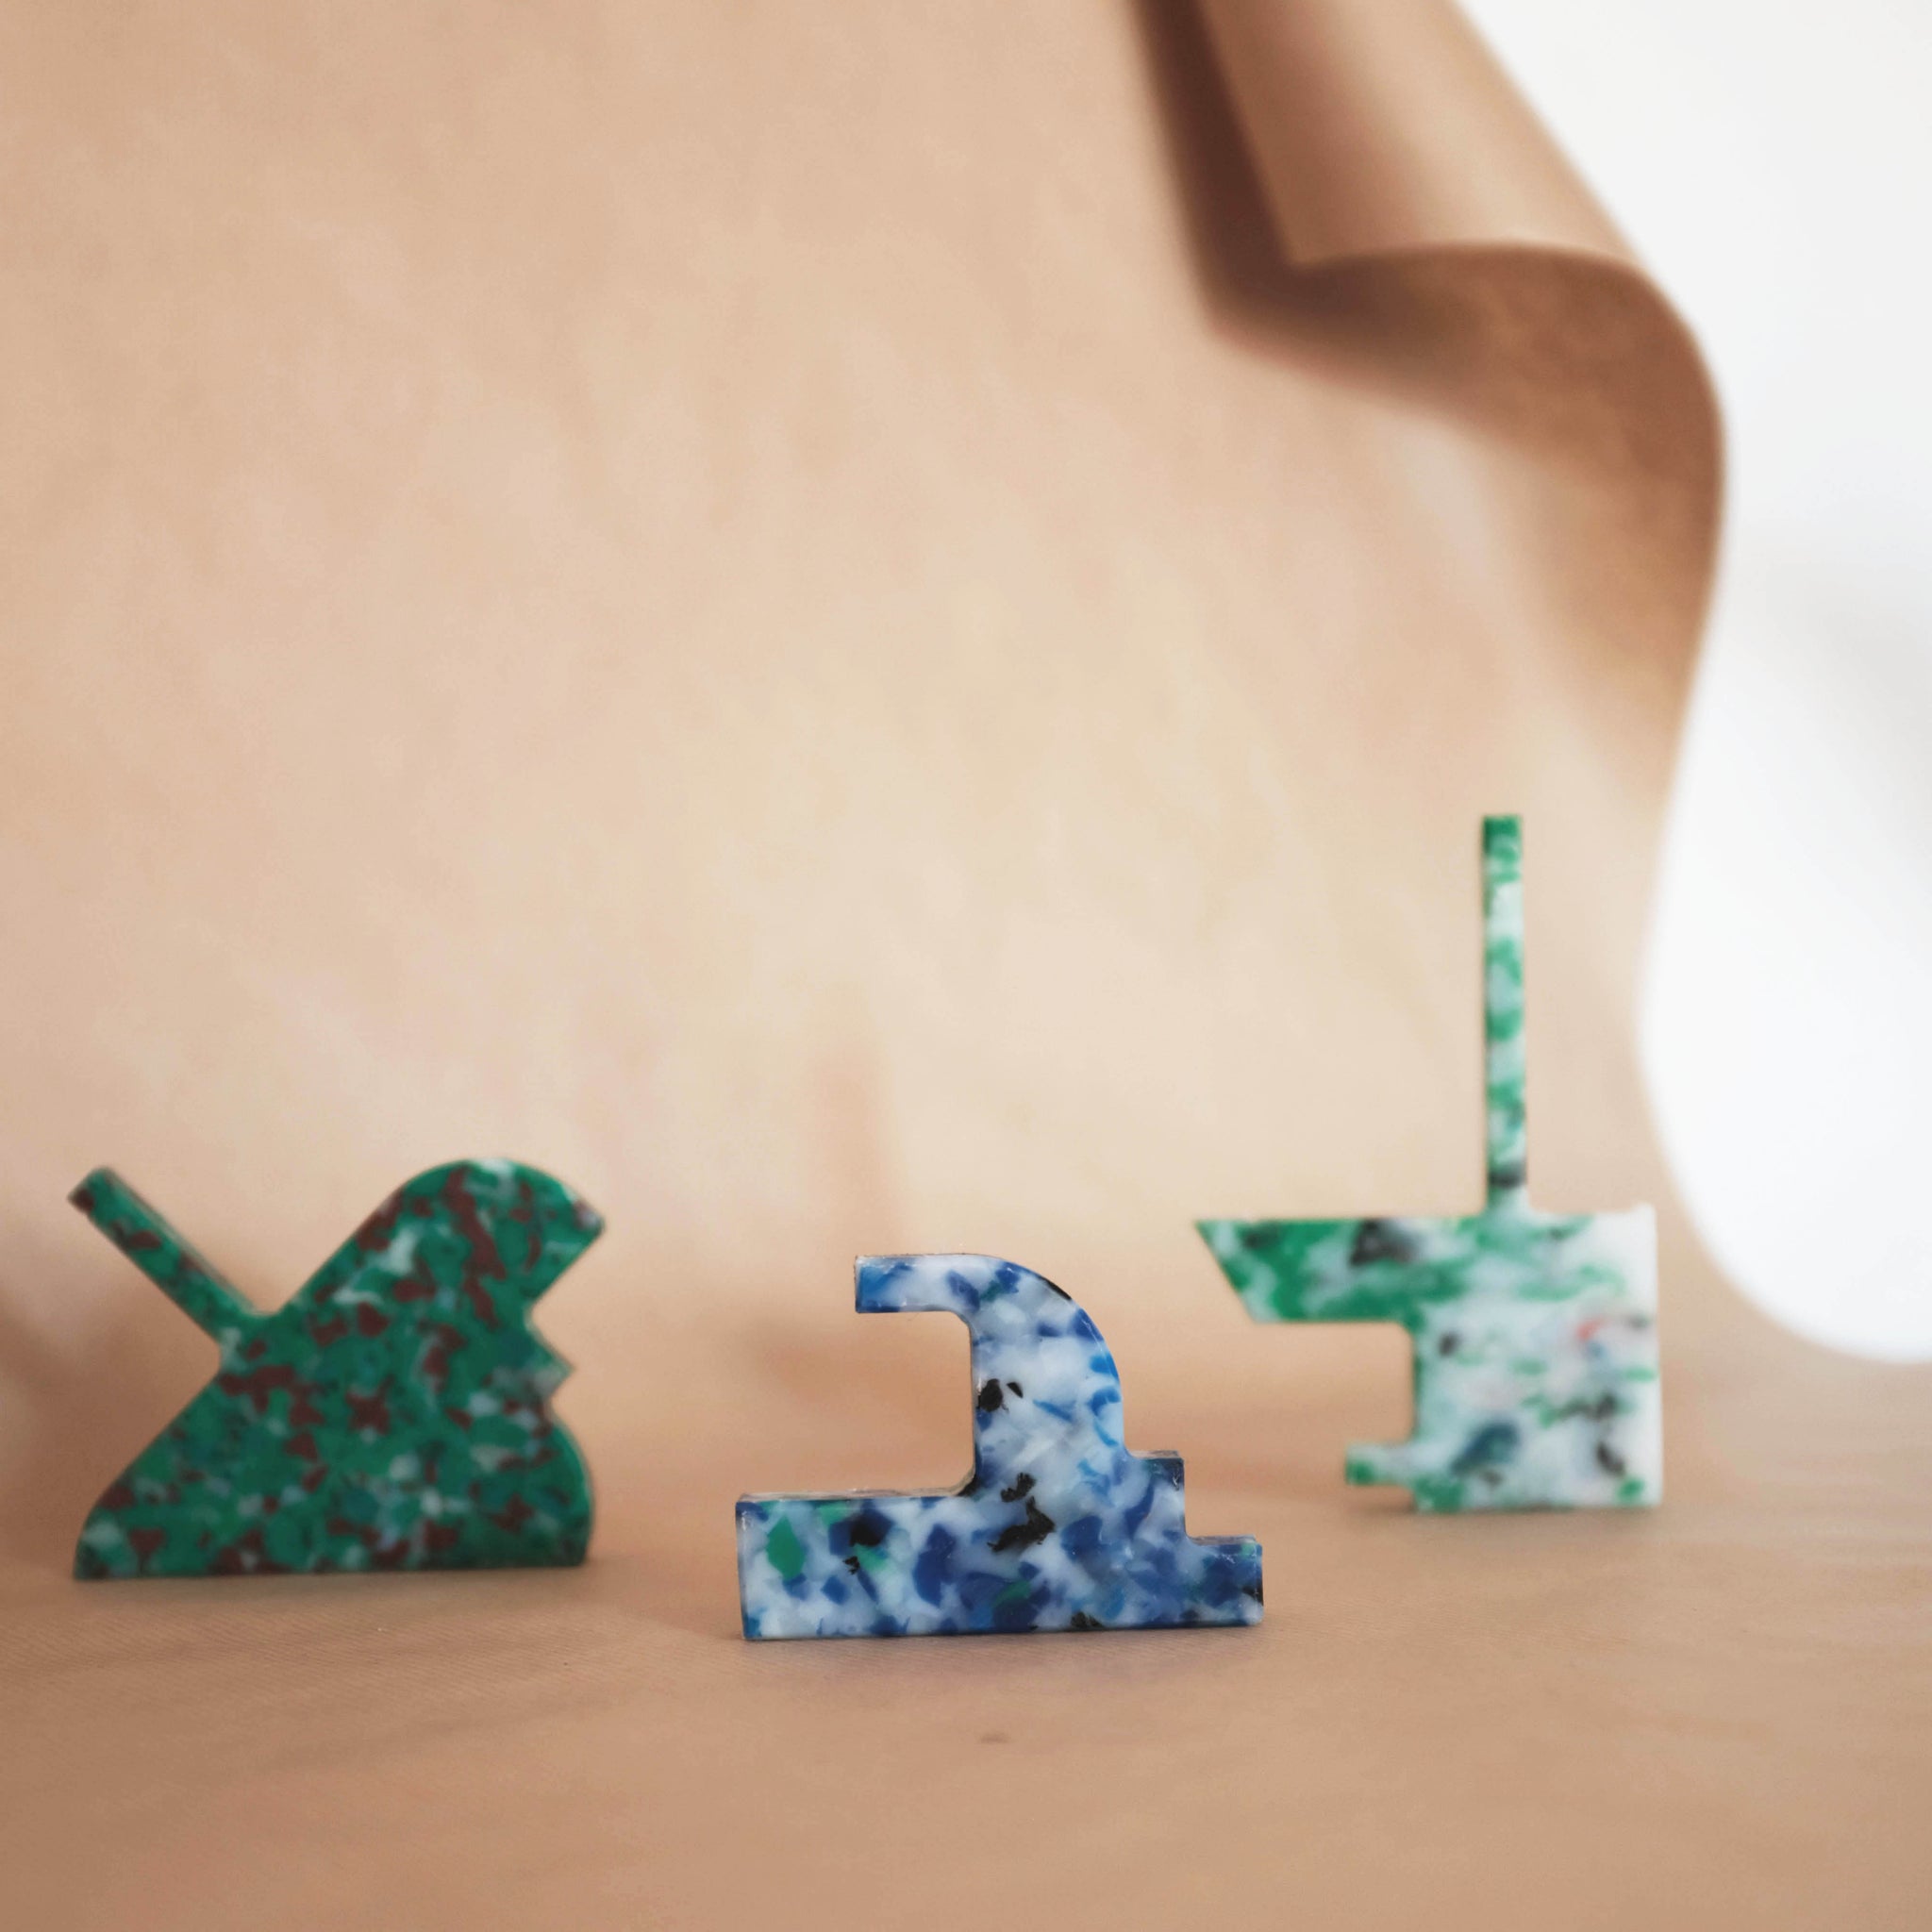 MIXED COLOUR WALL HOOKS FROM RANDOM PRODUCTION CUT OFFS BY THE MINIMONO PROJECT - BRAND FOR ECO FRIENDLY - PLAYFUL - MULTI FUNCTIONAL - SUSTAINABLE - HIGH QUALITY - DESIGN FURNITURE FROM RECYCLED PLASTIC FOR BOTH ADULT AND CHILDREN MADE IN BERLIN GERMANY